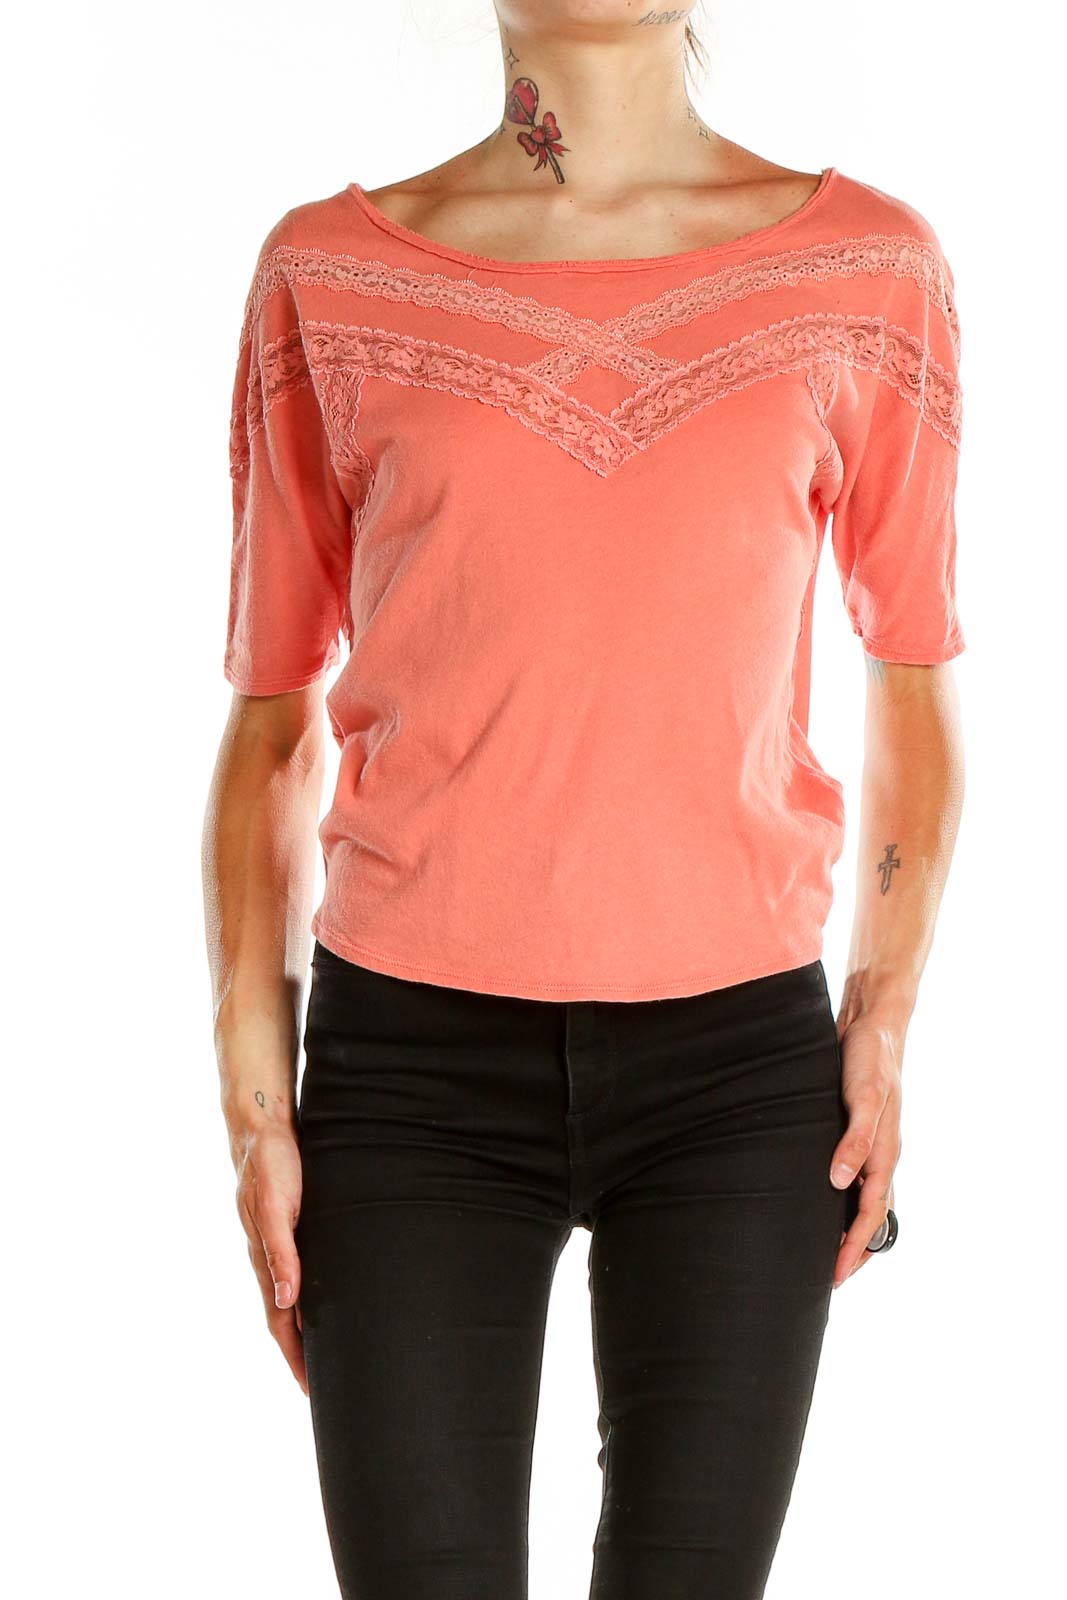 Pink Lace Top Front